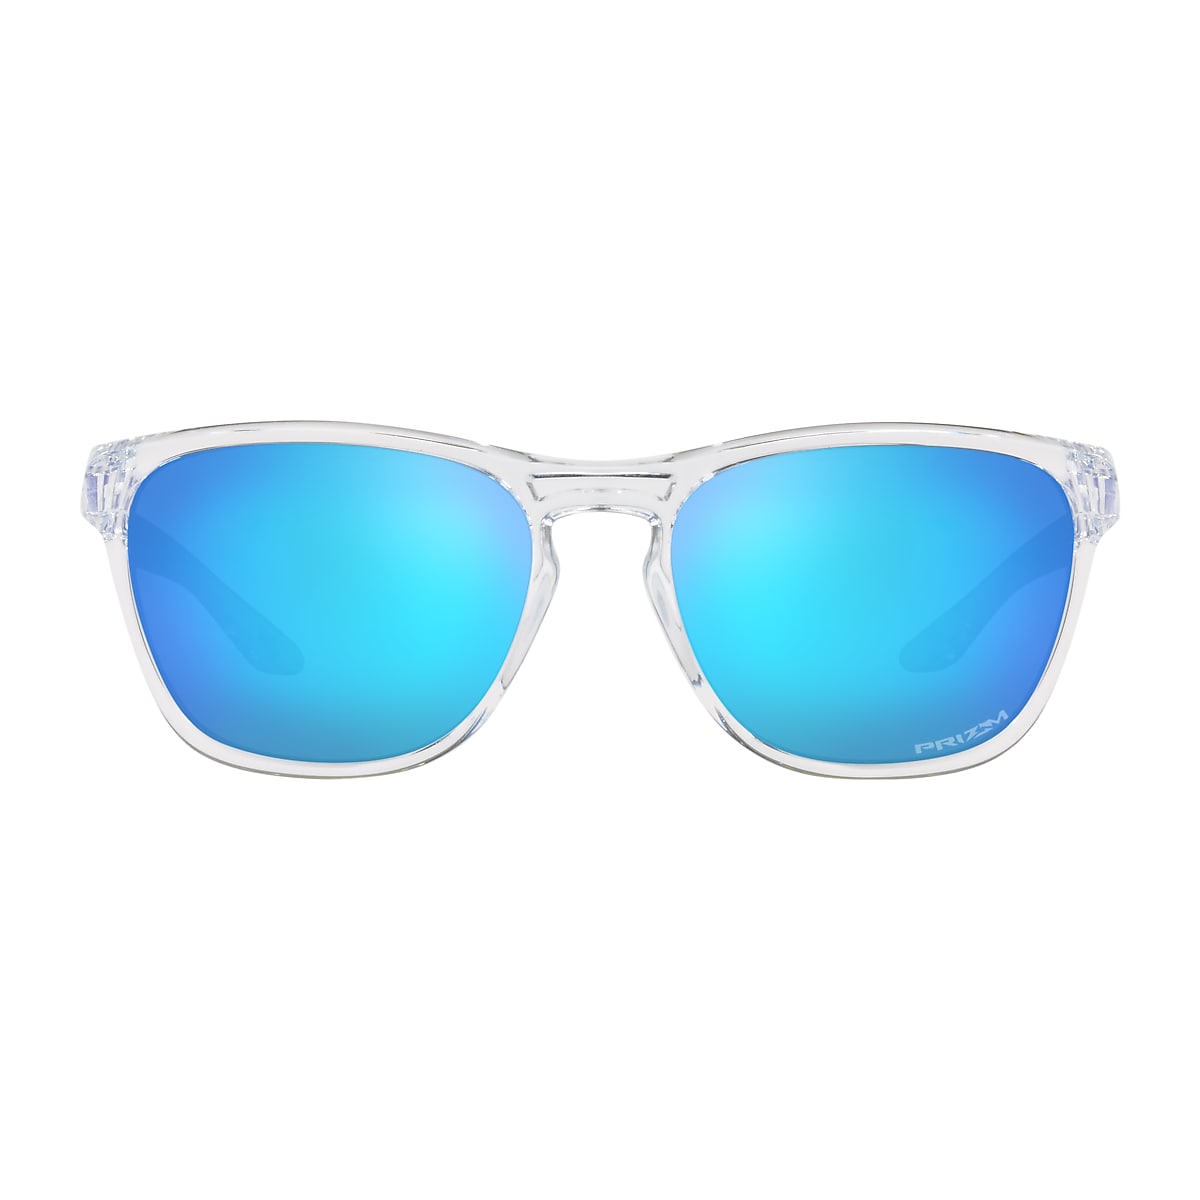 Manorburn Prizm Sapphire Lenses, Polished Clear Frame Sunglasses